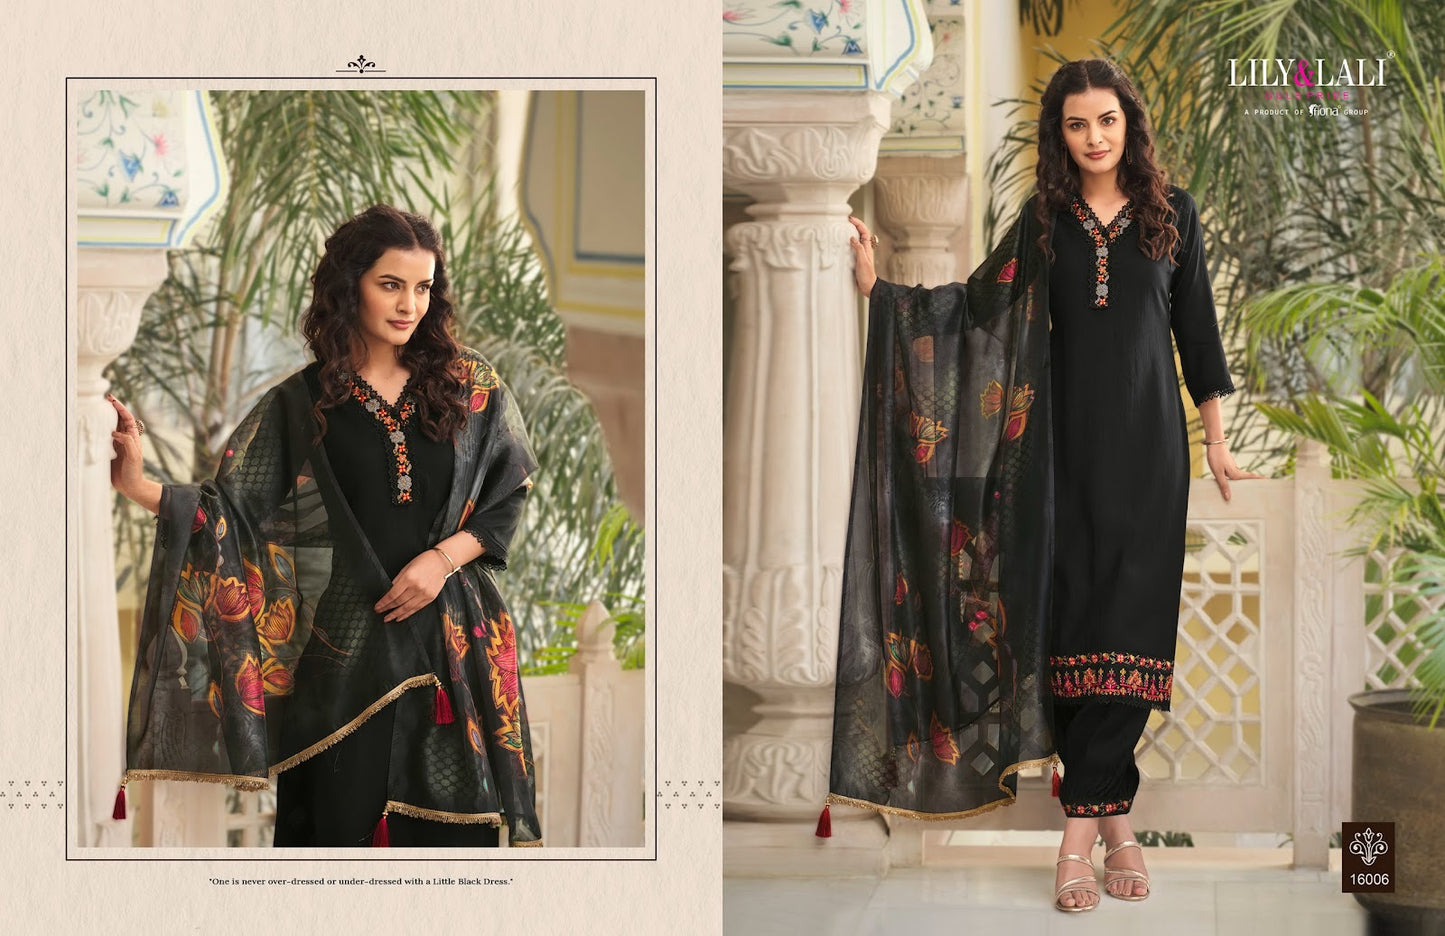 Afghani Vol 2 Lily Lali Milan Silk Readymade Pant Style Suits